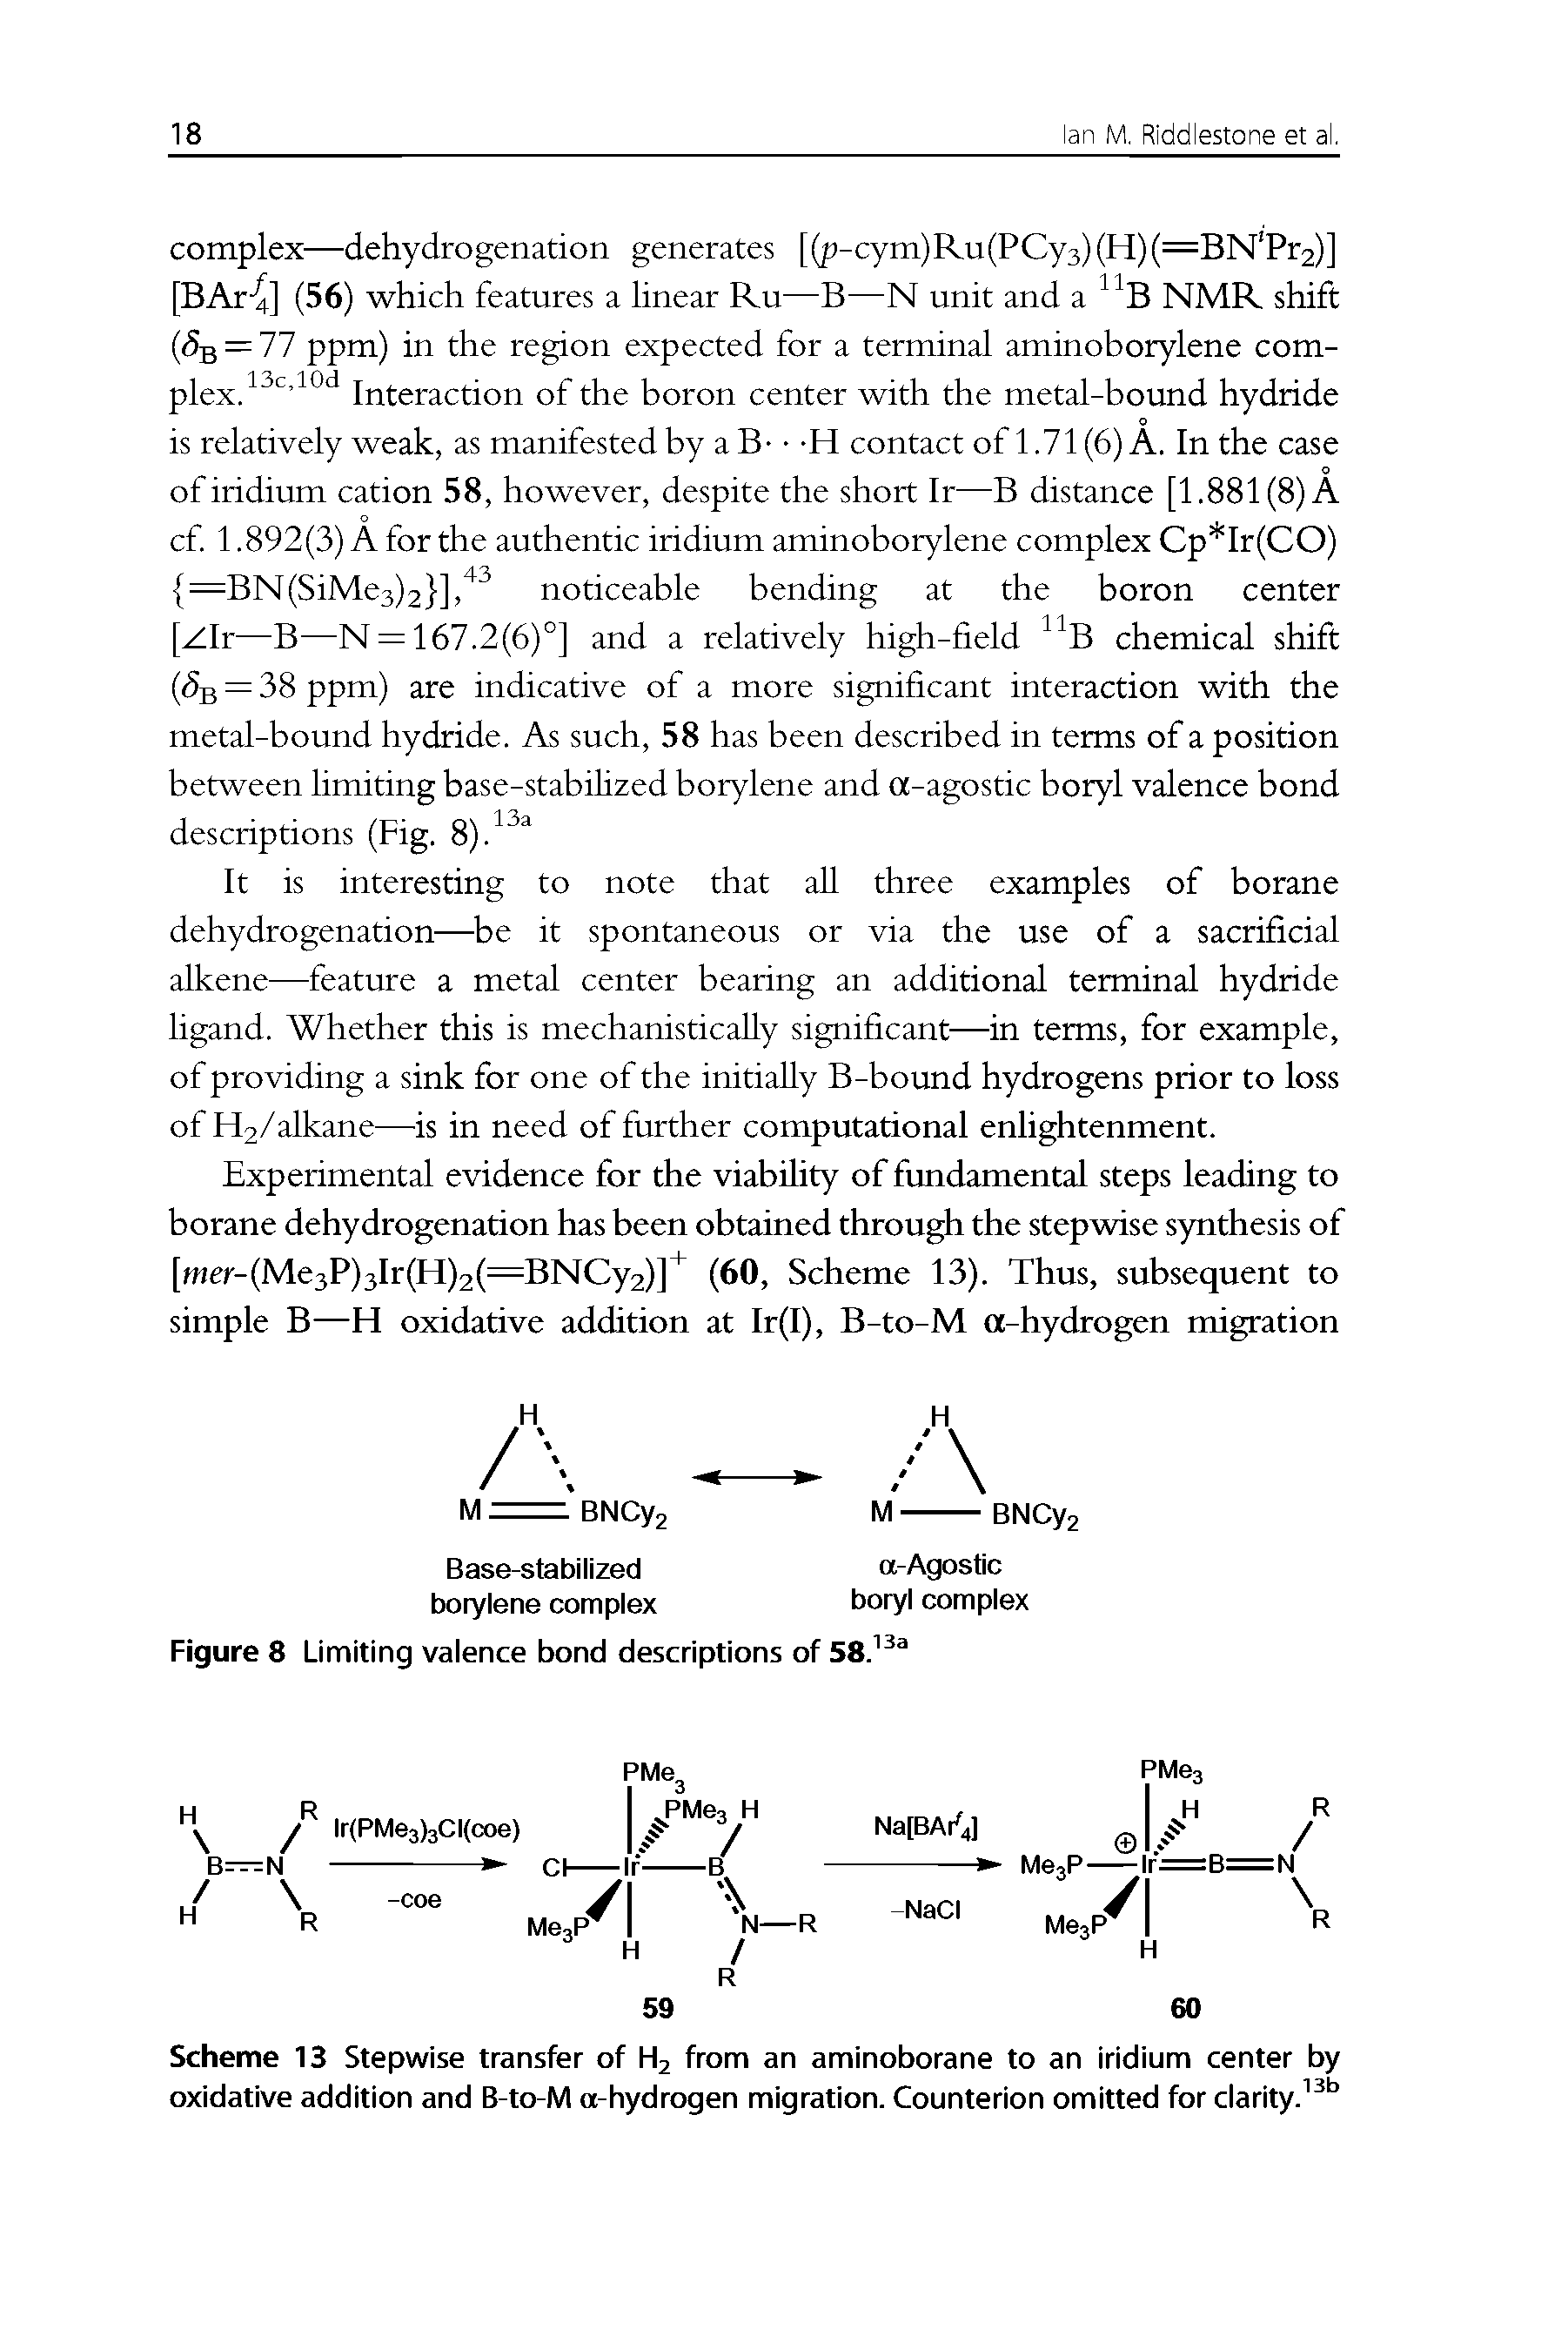 Scheme 13 Stepwise transfer of H2 from an aminoborane to an iridium center by oxidative addition and B-to-M a-hydrogen migration. Counterion omitted for clarity. ...